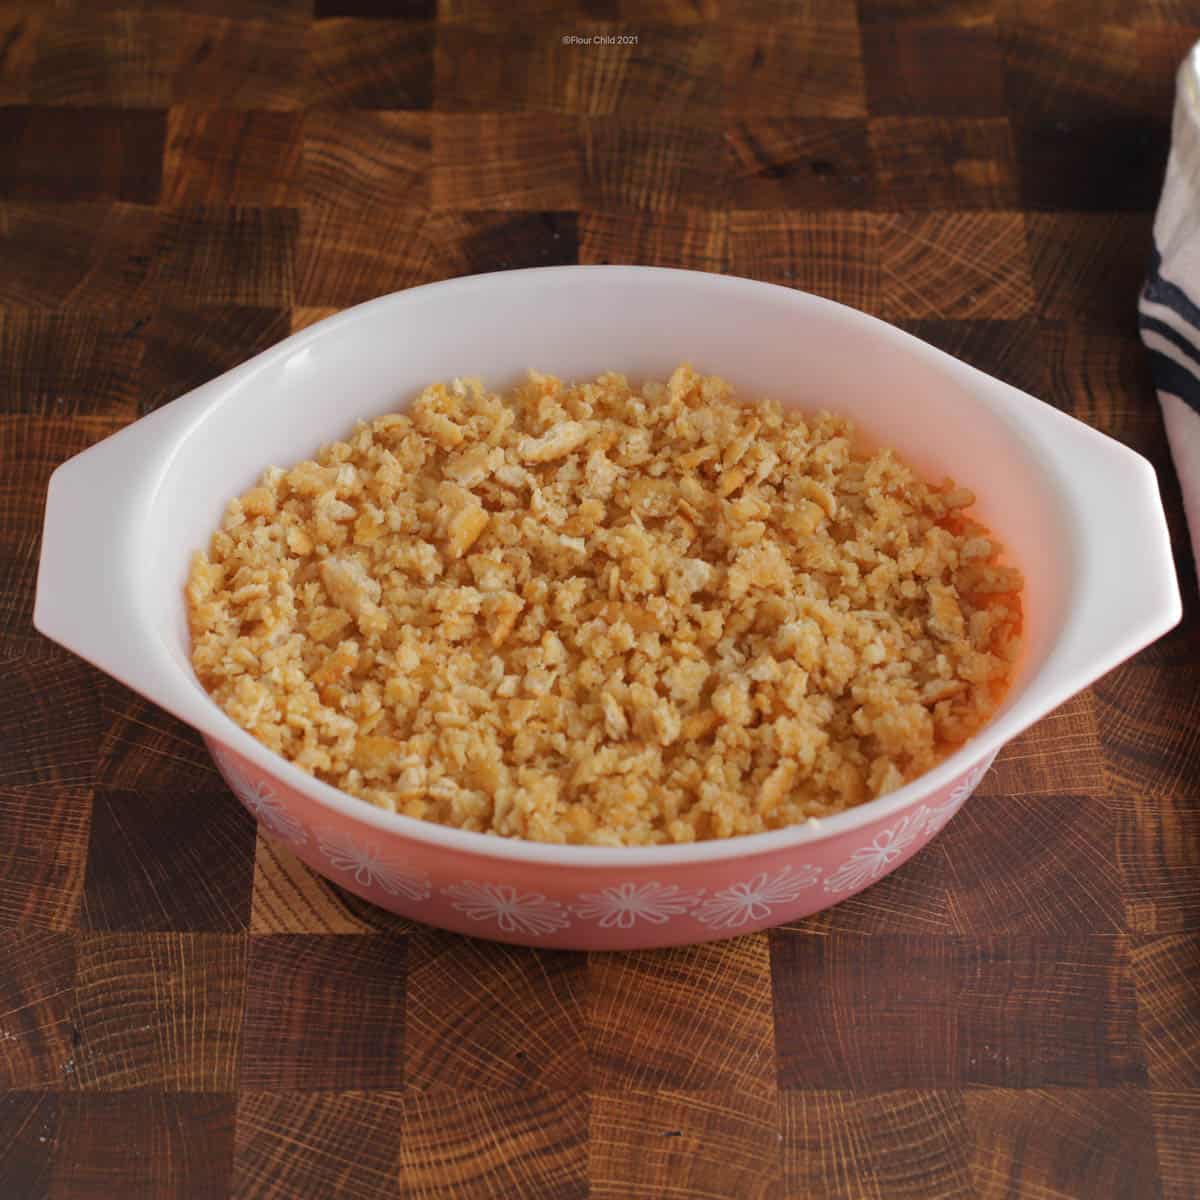 Butter crumbs on top of macaroni and cheese in casserole dish